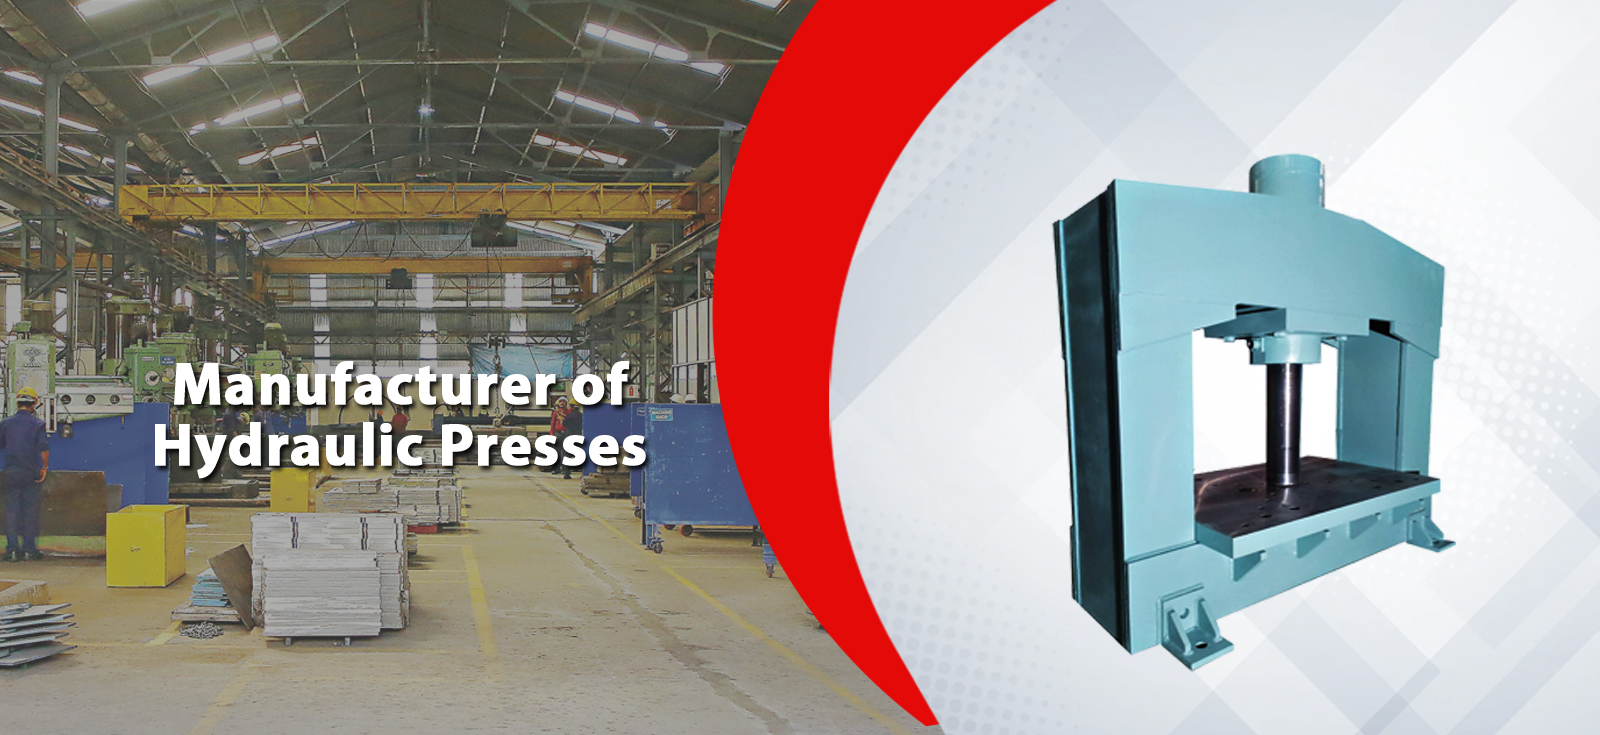 Manufacturer of Hydraulic Presses